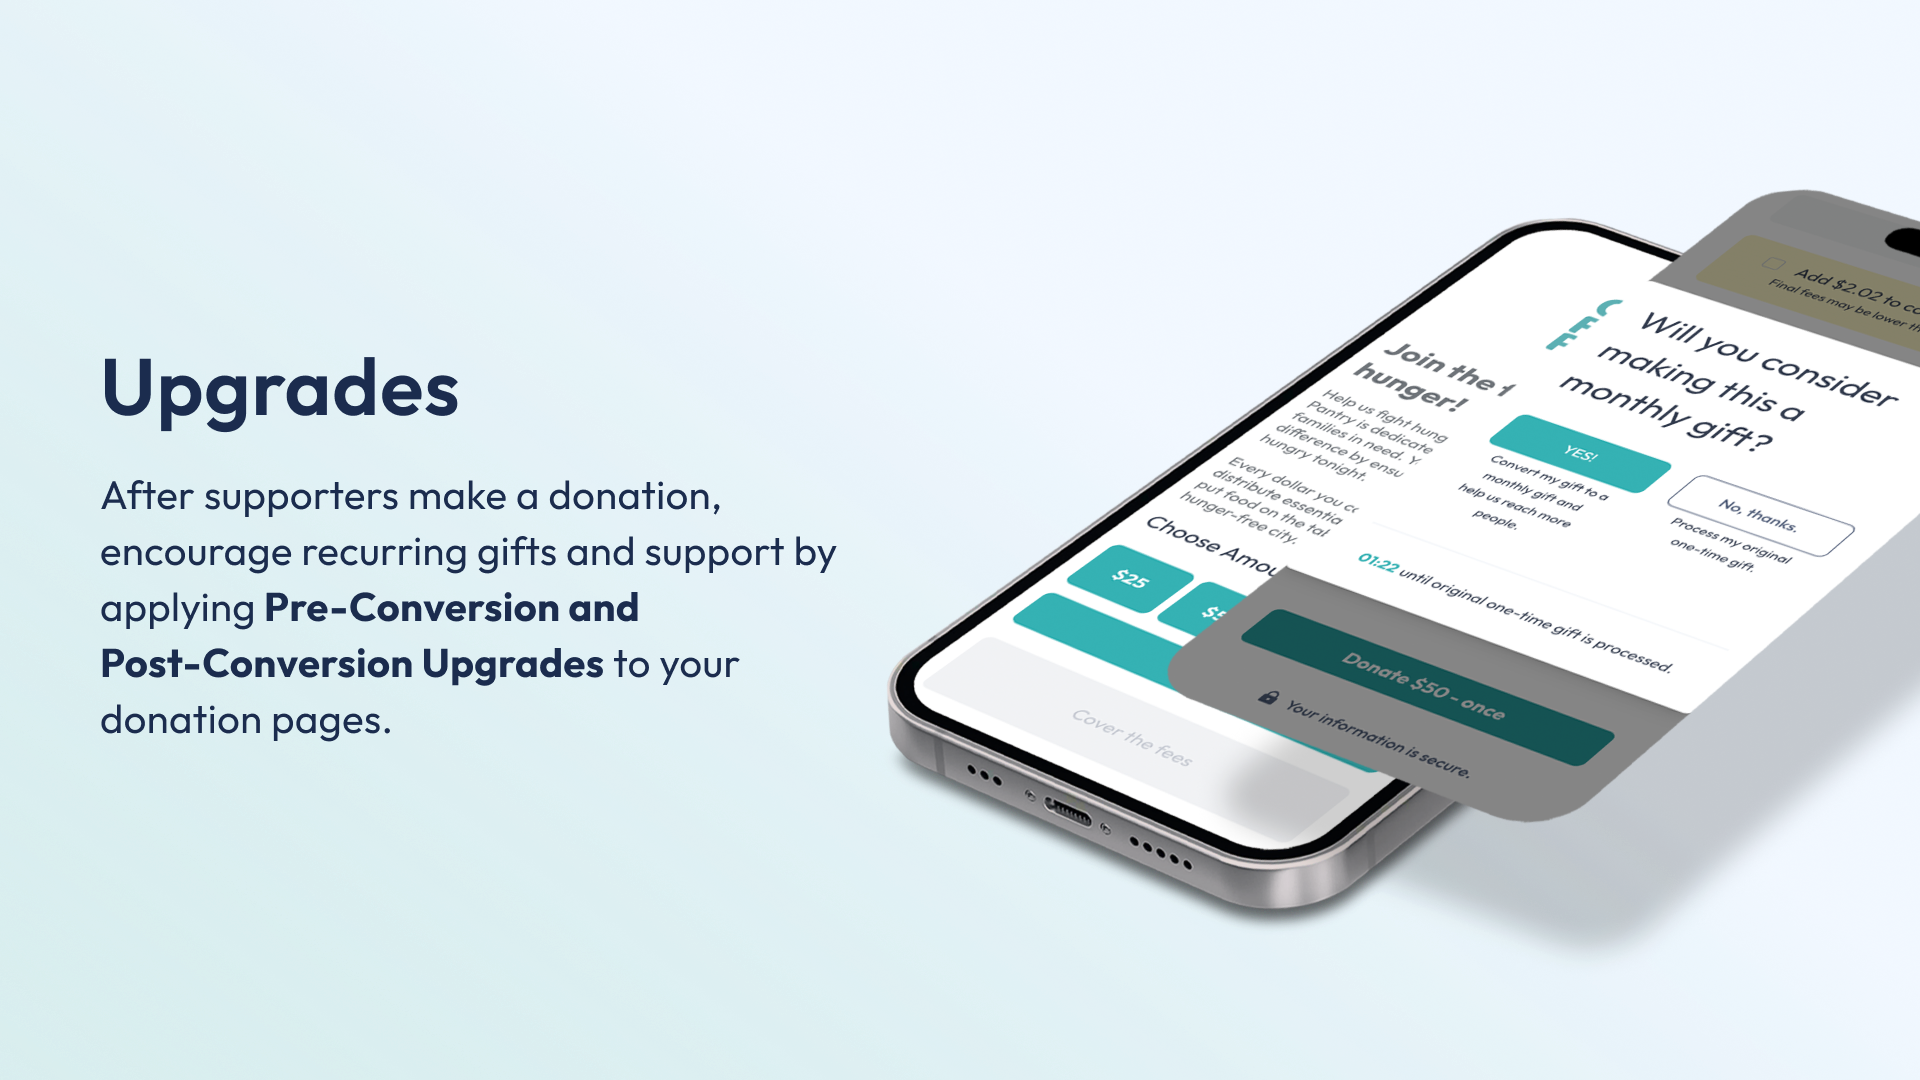 After supporters make a donation, encourage recurring gifts and support by applying Pre-Conversion and Post-Conversion Upgrades to your donation pages.